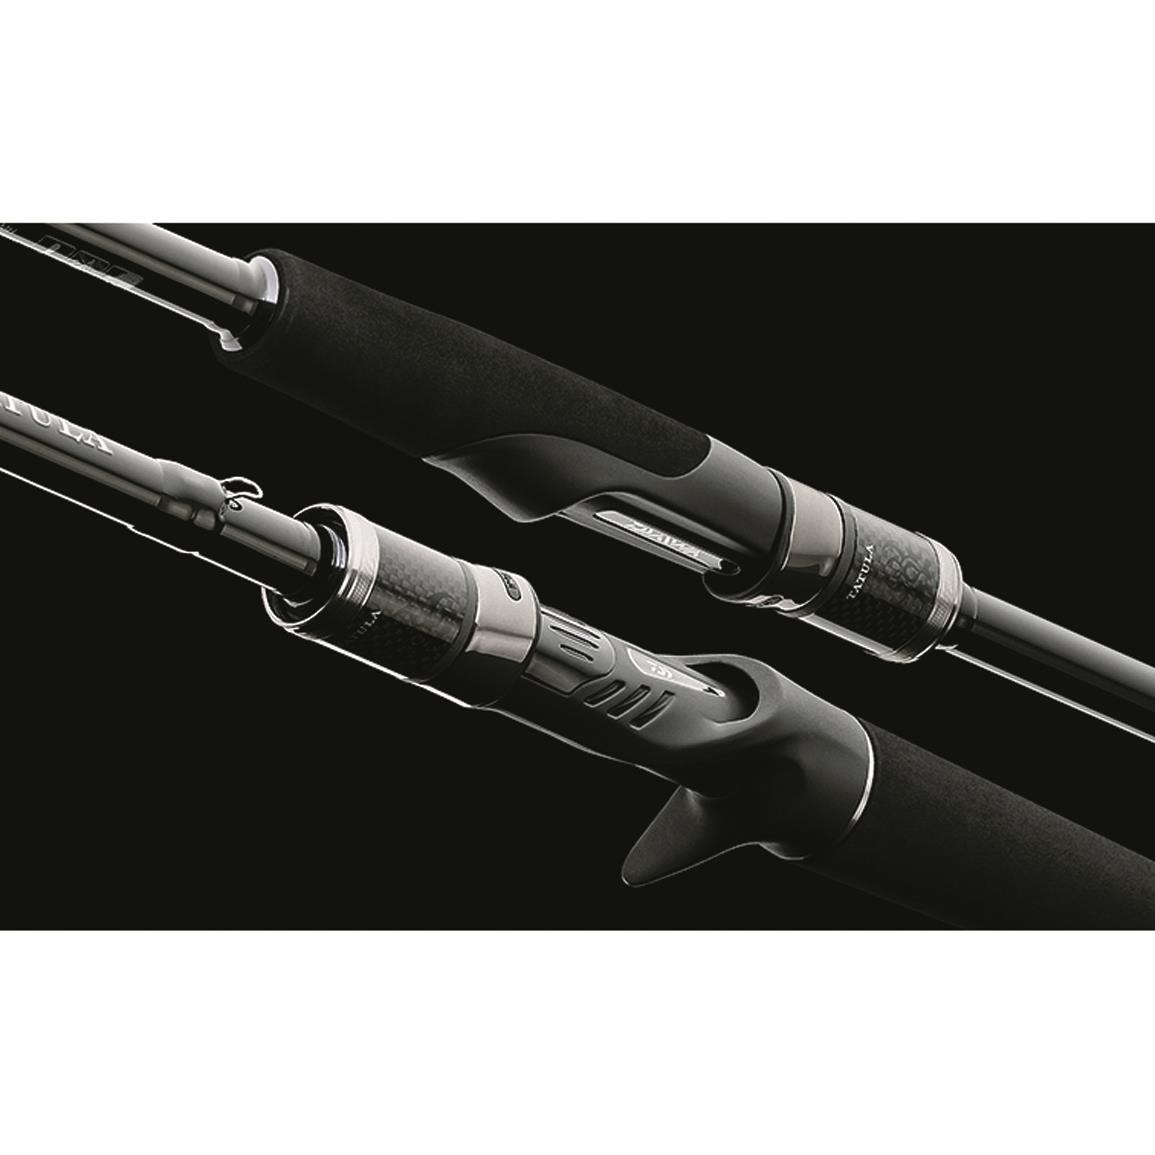 Shimano SLX A Casting Rod, 7'2 Length, Medium Heavy Power, Extra Fast  Action - 730480, Casting Rods at Sportsman's Guide